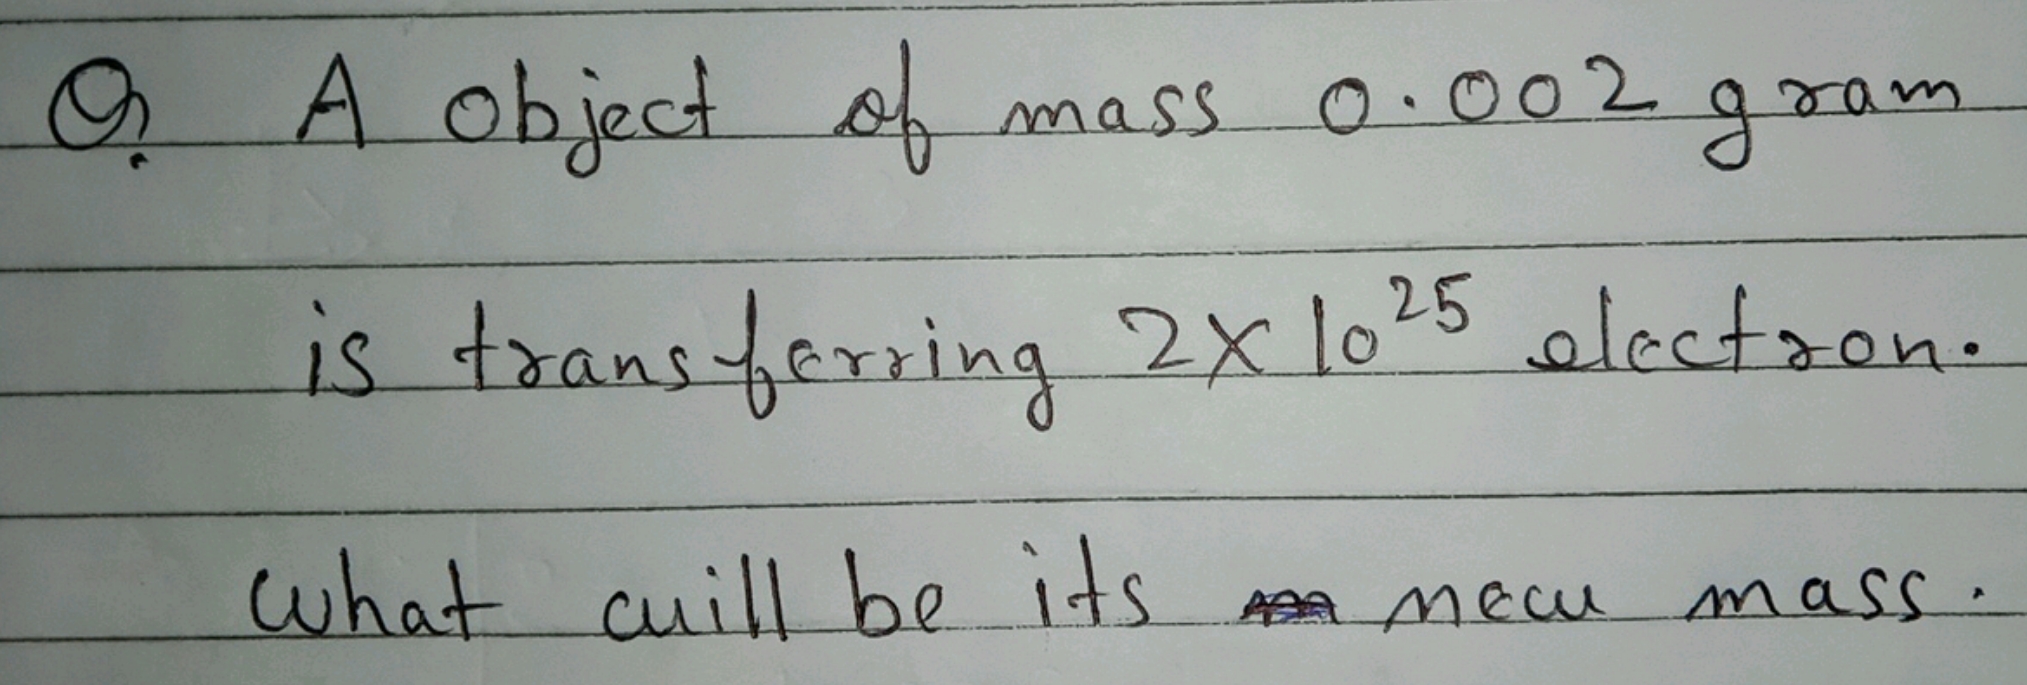 Q? A object of mass 0.002 gram is transferring 2×1025 electron. What q